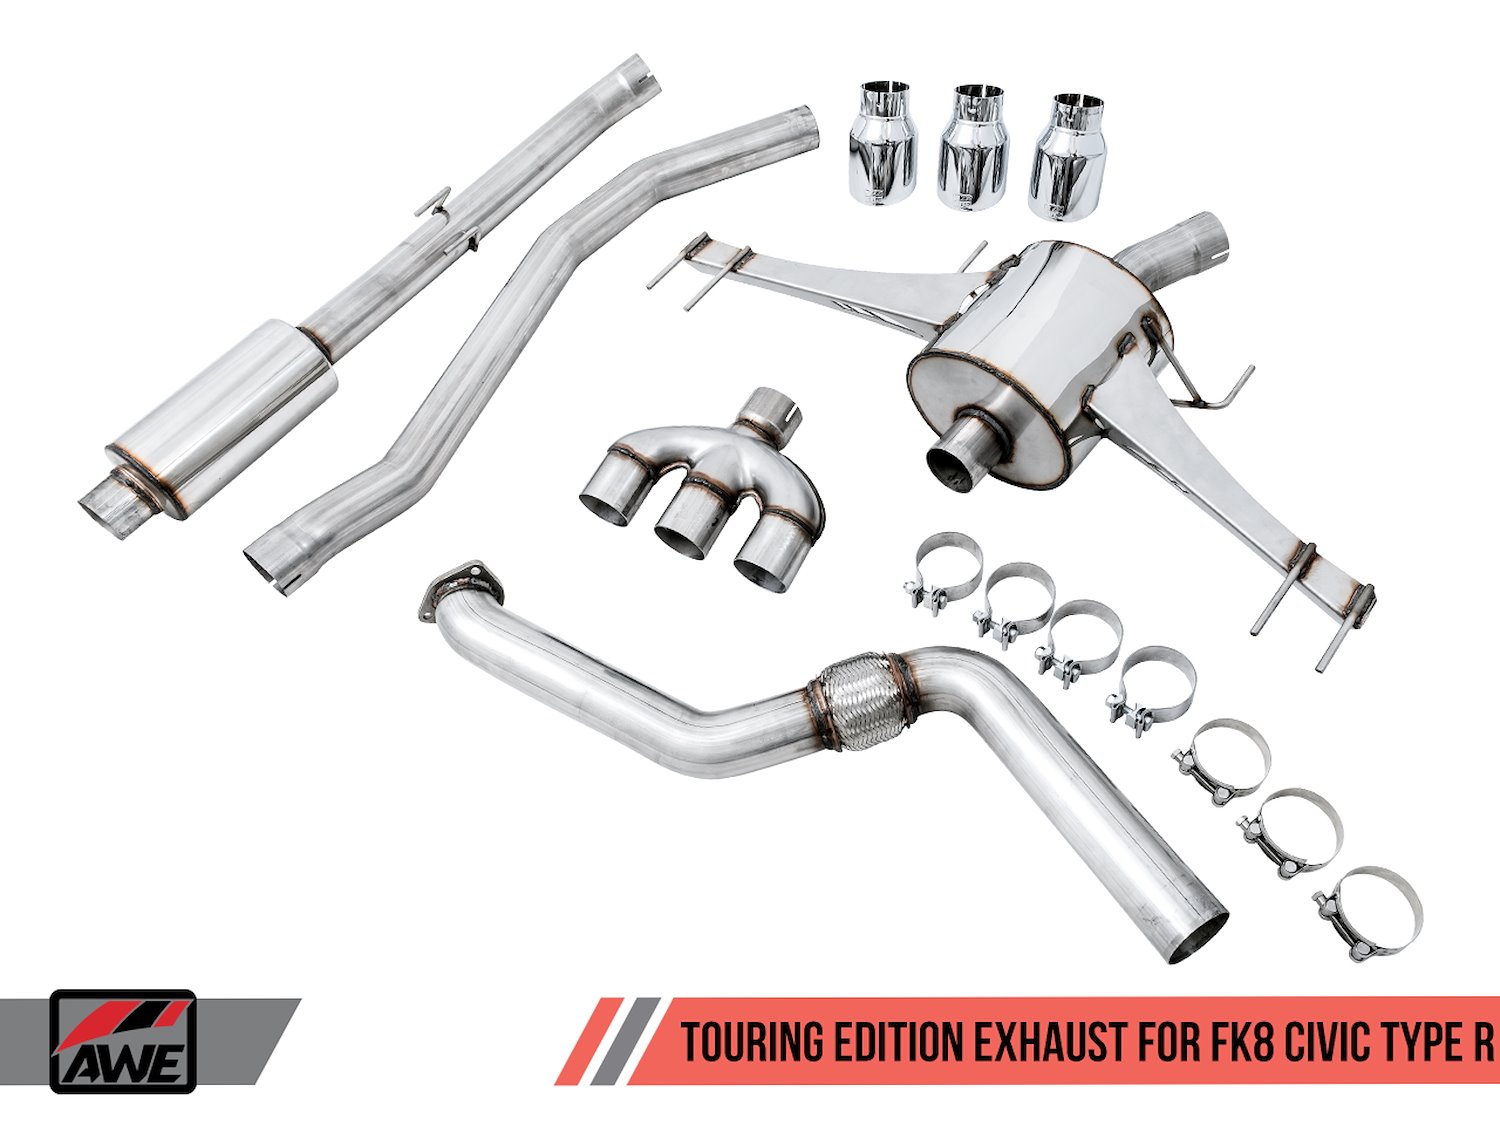 AWE Touring Edition Exhaust for FK8 Civic Type R (includes Front Pipe and DualPhase Mid Pipe) - Triple Diamond Black Tips